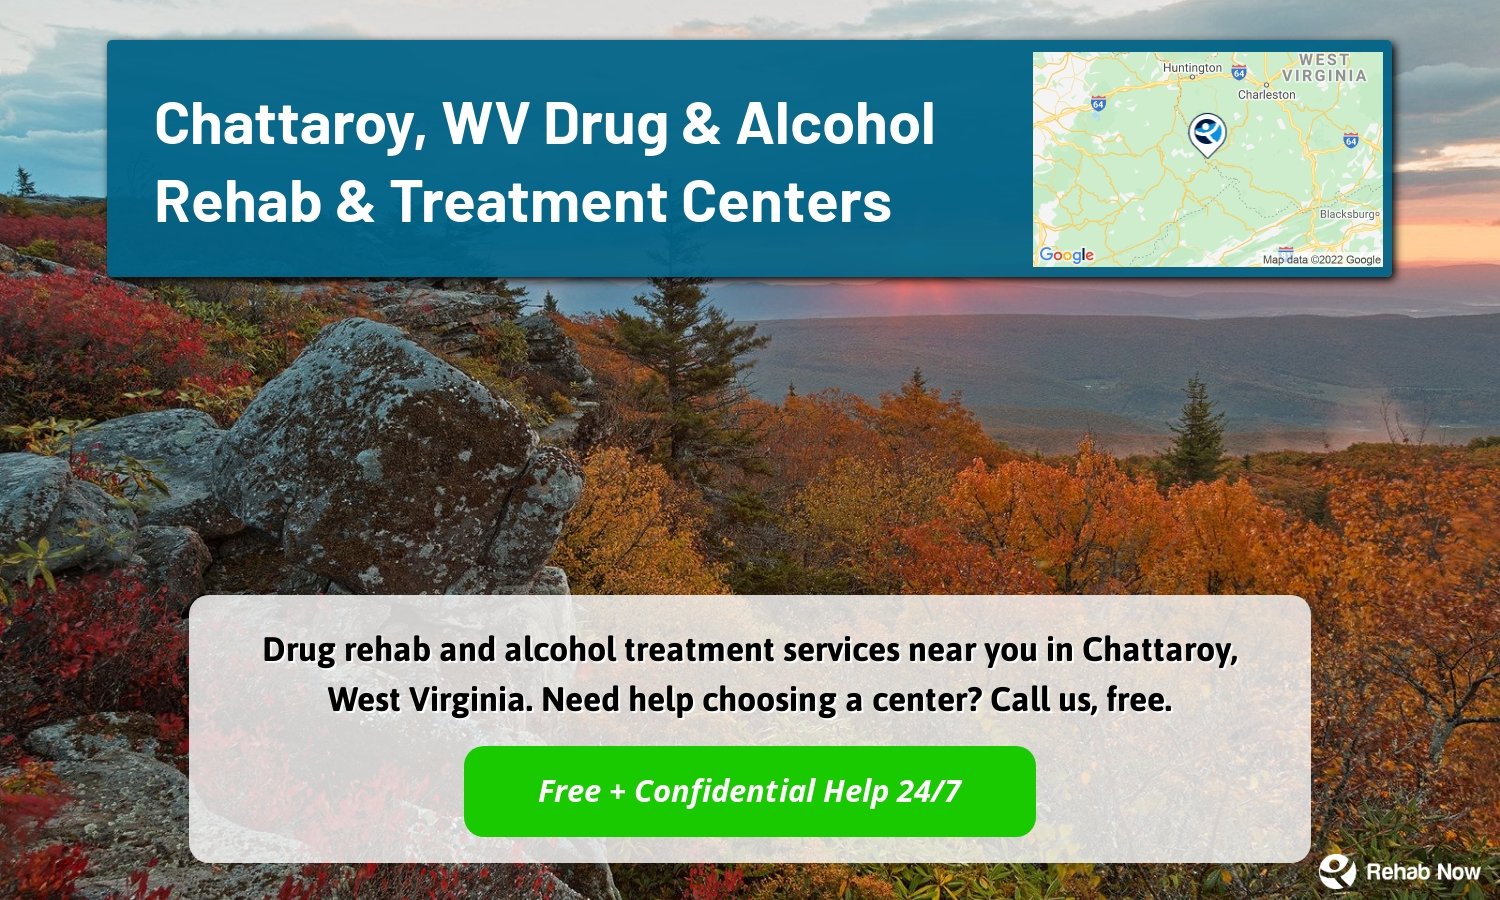 Drug rehab and alcohol treatment services near you in Chattaroy, West Virginia. Need help choosing a center? Call us, free.